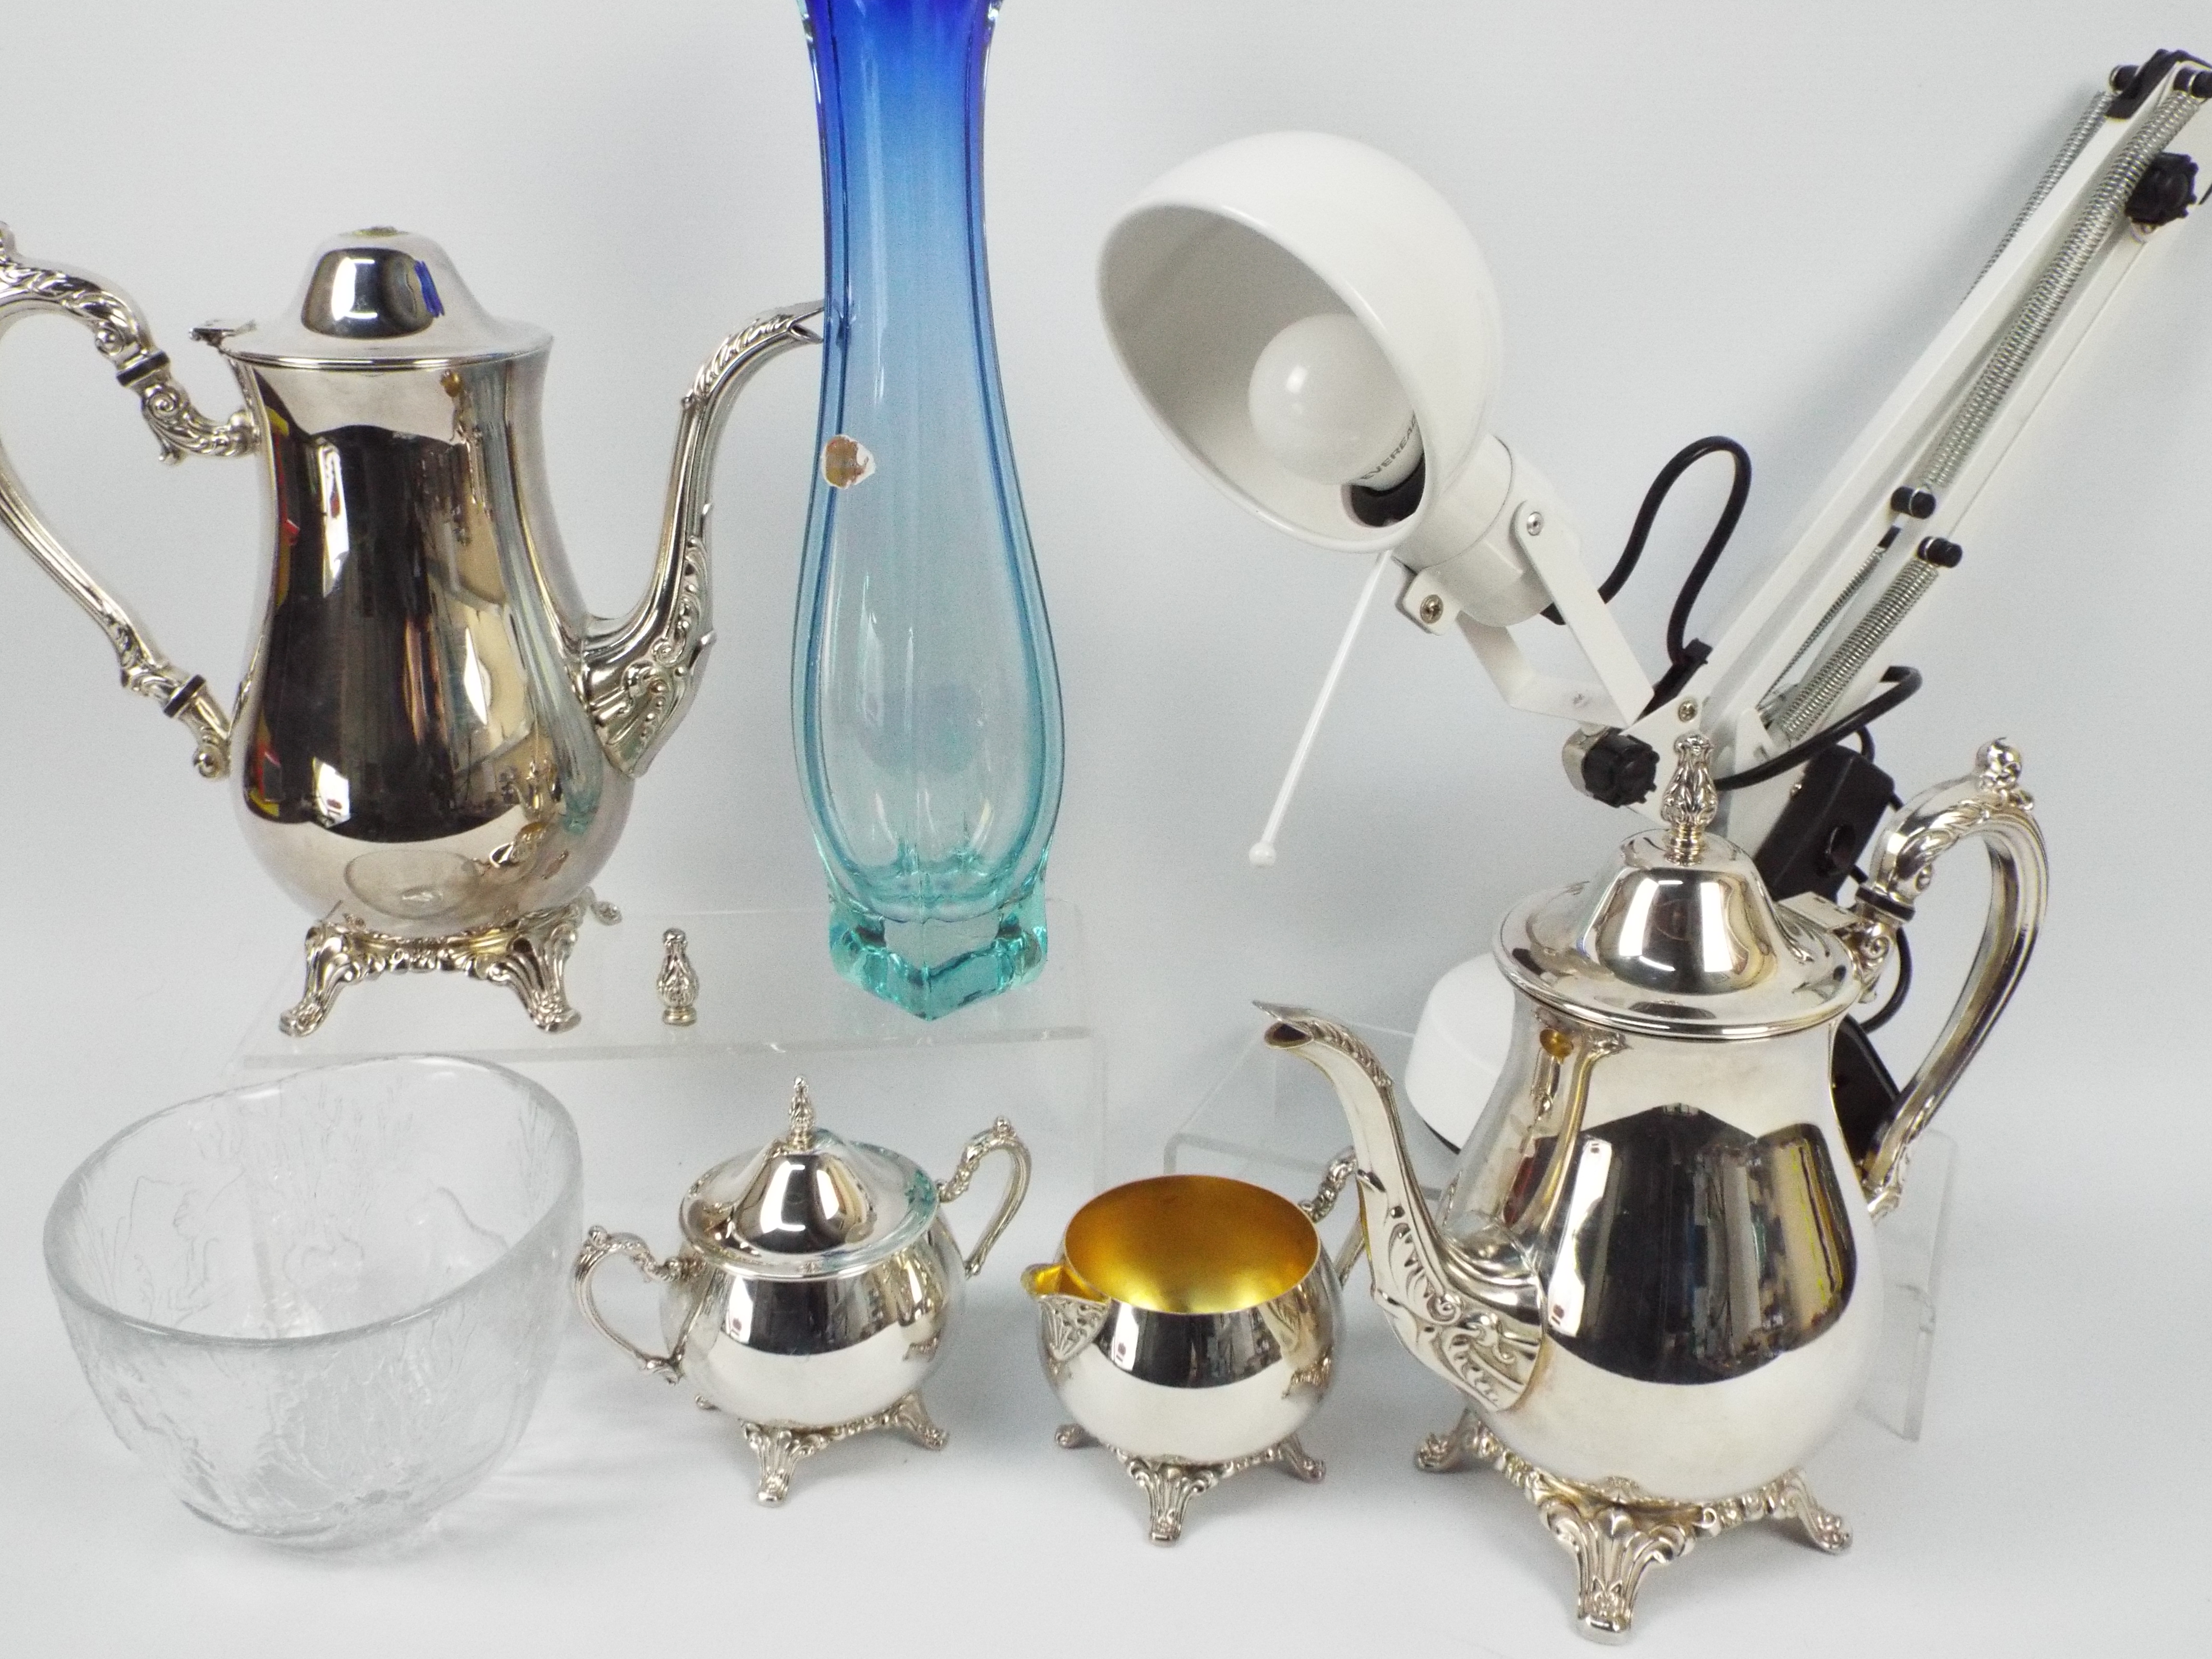 Lot to include Oneida plated ware, Murano glass vase, anglepoise style lamp, - Image 4 of 5